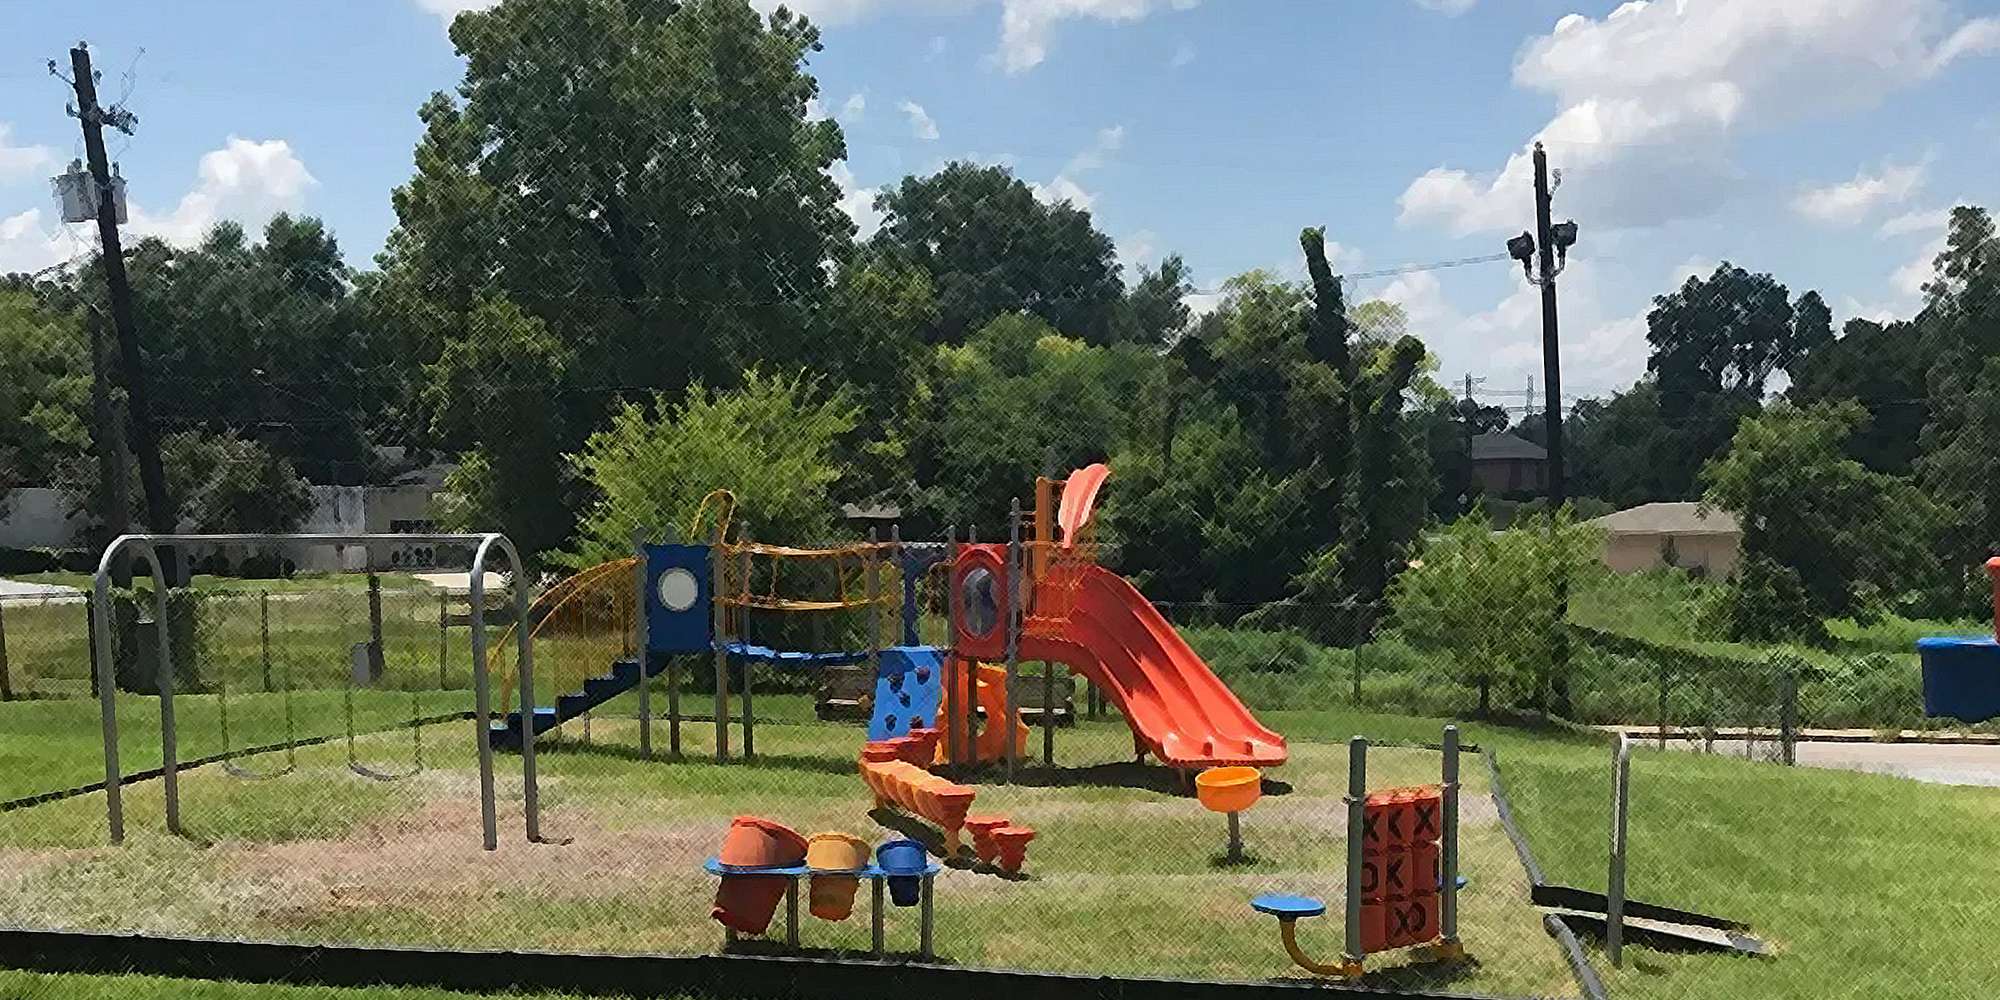 A photo of the playground in Center Sandwich, New Hampshire